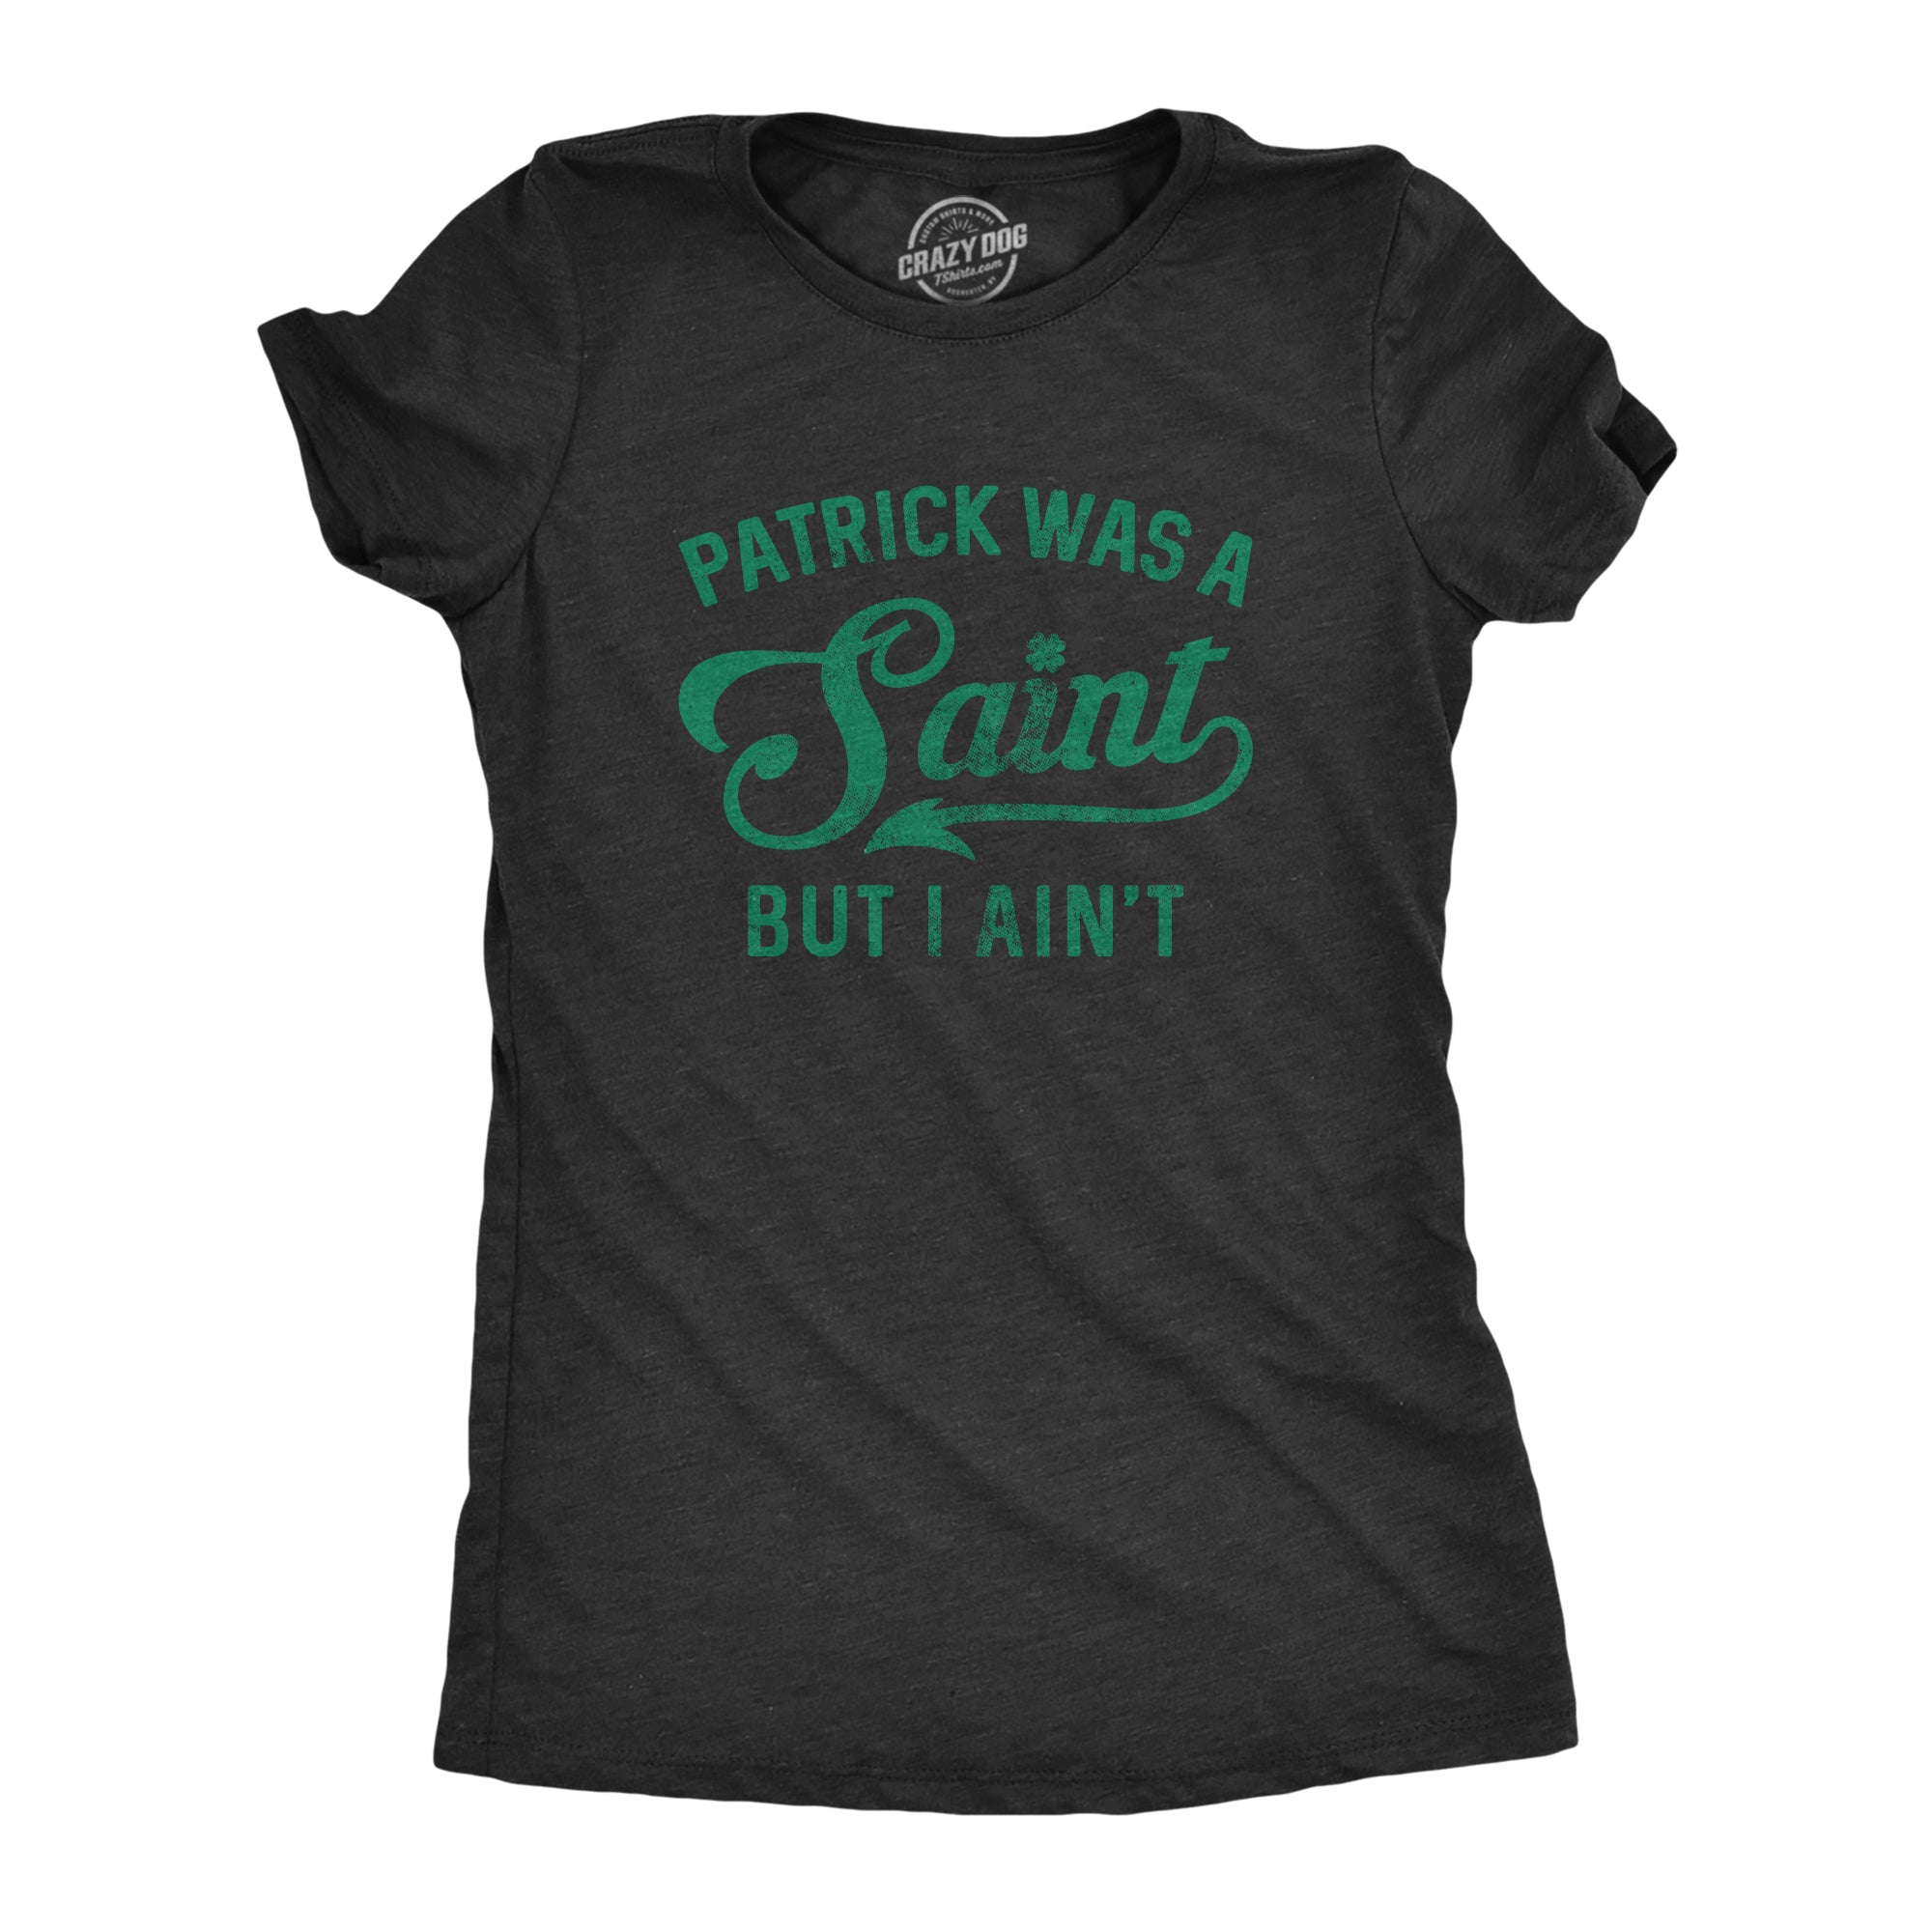 Funny Heather Black Patrick Was A Saint But I Ain't Womens T Shirt Nerdy Saint Patrick's Day Beer Tee